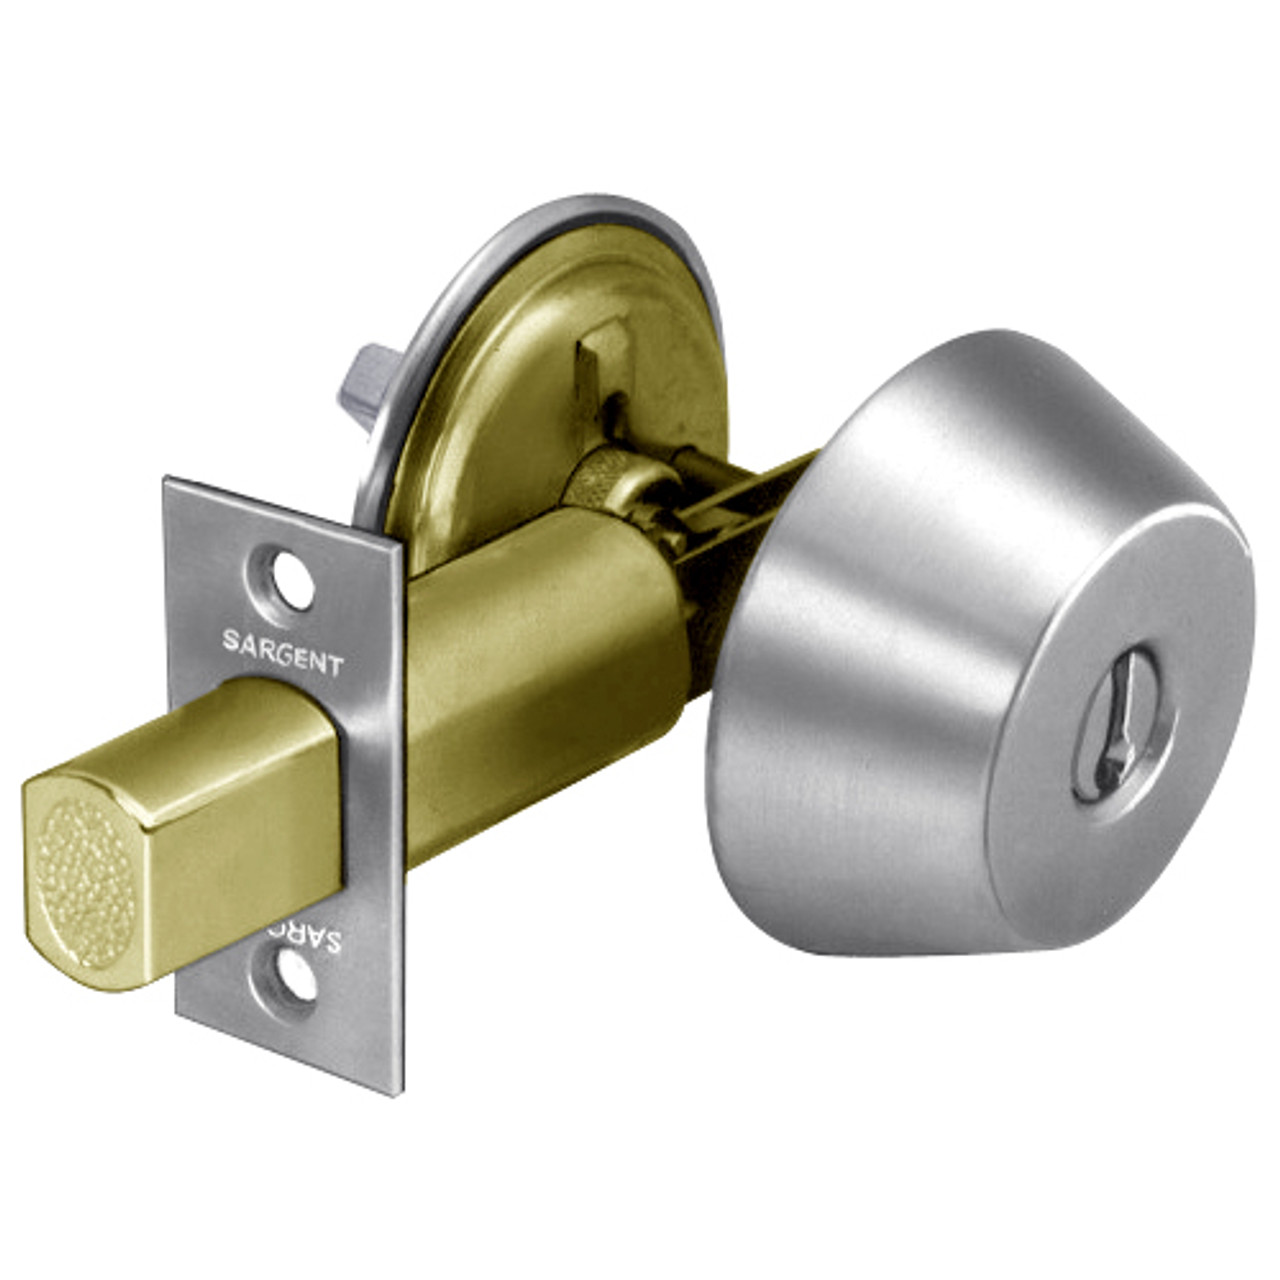 485-26 Sargent 480 Series Single Cylinder Auxiliary Deadbolt Lock with Thumbturn in Bright Chrome